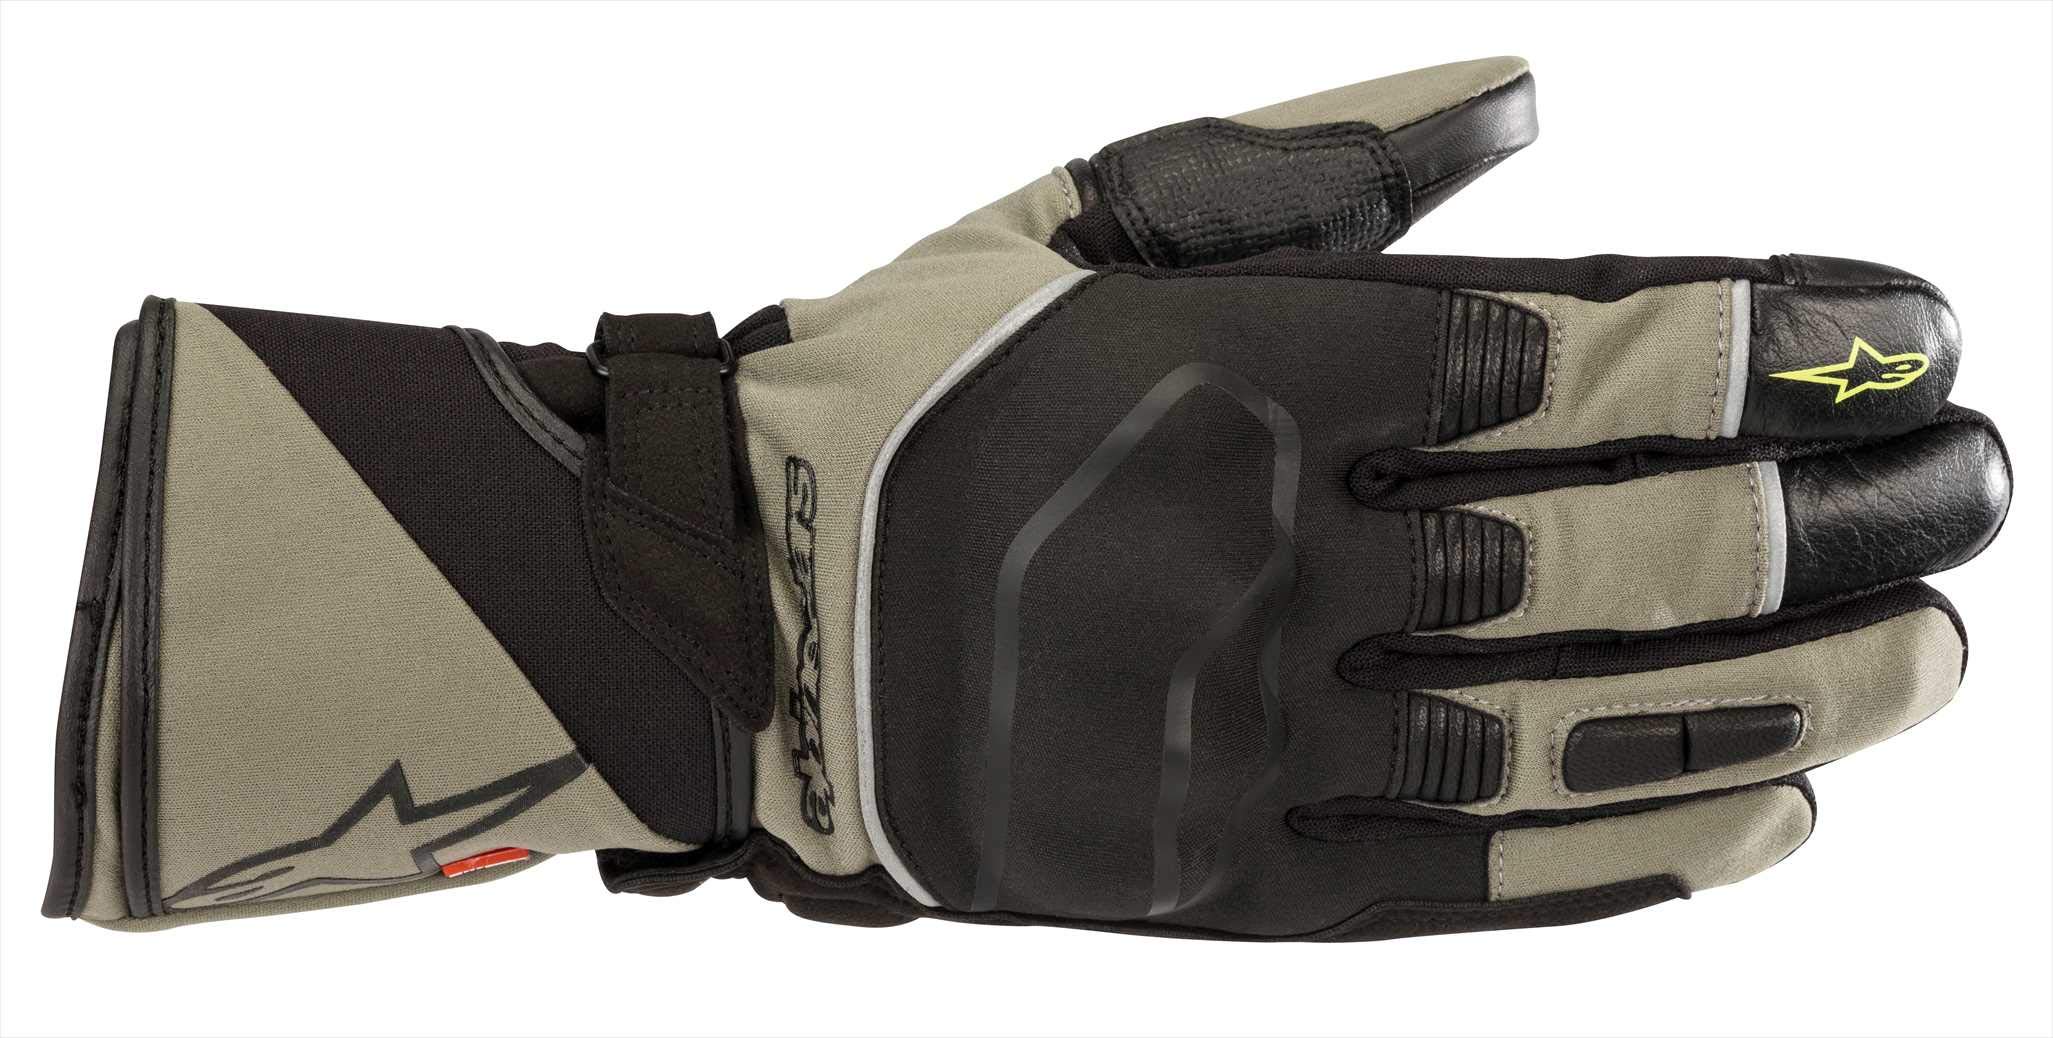 Alpinestars Men's Andes Touring Outdry Waterproof Motorcycle Riding Glove, Military Green/Black, 2X-Large